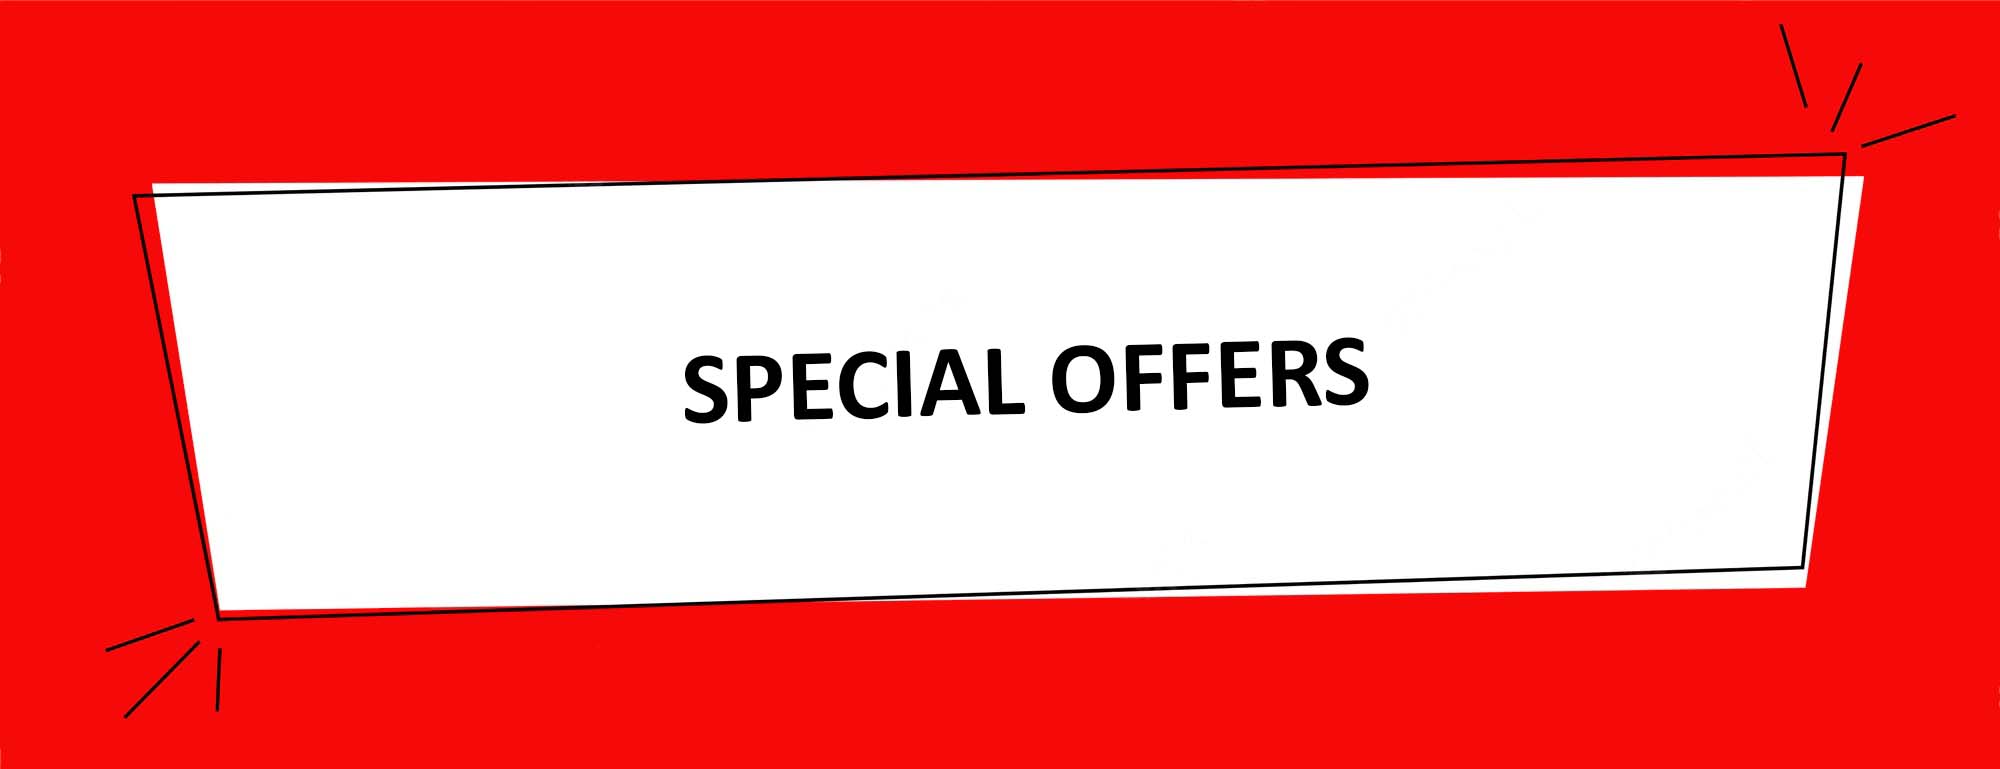 Promotions-special offers